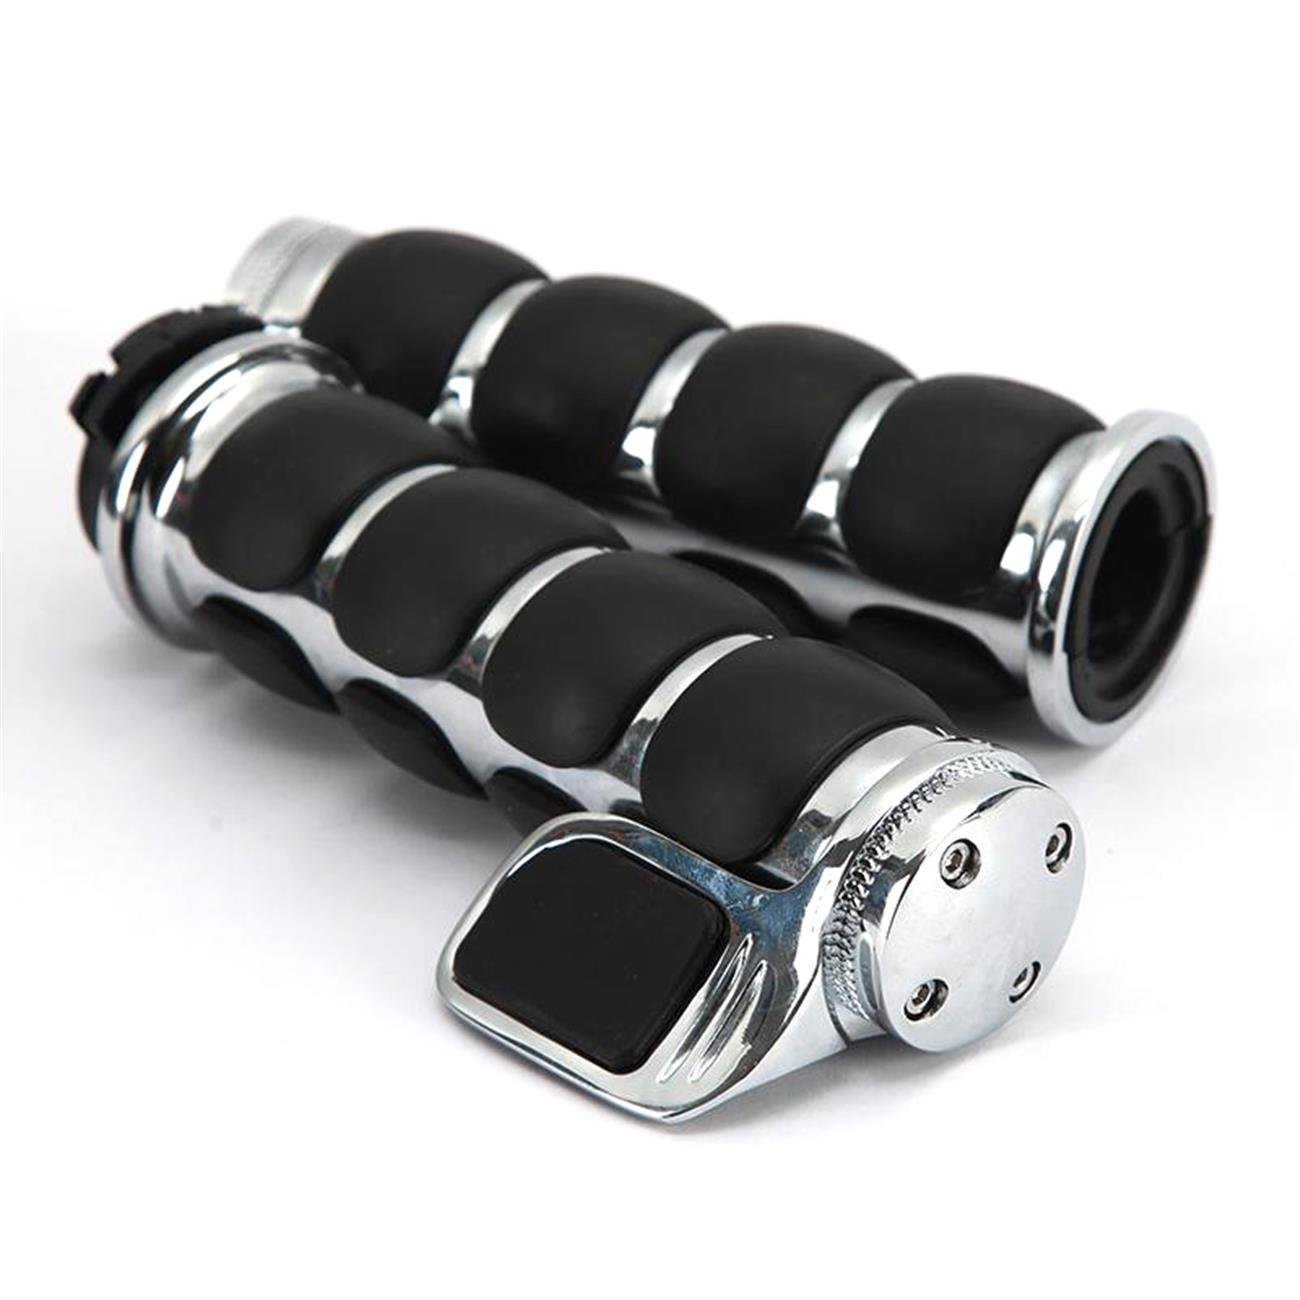 2PCS Motorcycle Handlebar Grips with Throttle Control Non-slip Hand Grip for Motorcycles  Cruisers